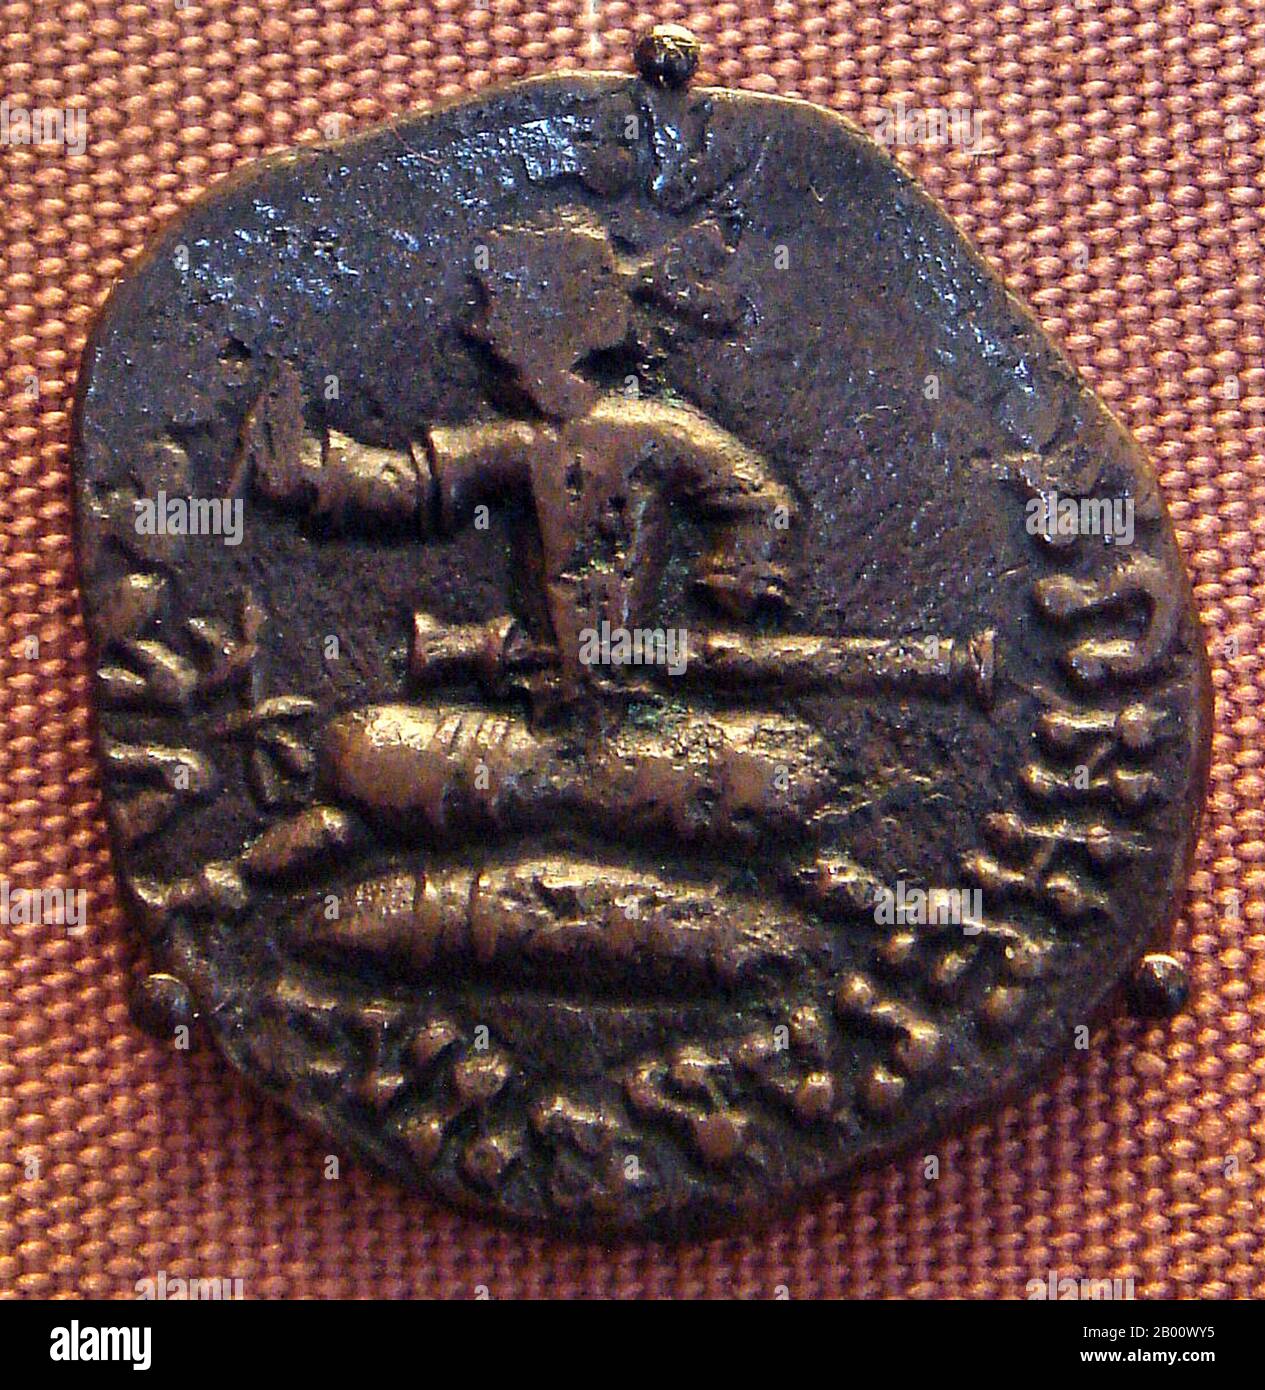 India: Coin of Azes II, with king seated, holding a drawn sword and a whip. Photo by World Imaging (CC BY-SA 3.0 License).  Azes II (reigned circa 35-12 BCE), may have been the last Indo-Scythian king in northern India. After the death of Azes II, the rule of the Indo-Scythians in northwestern India finally crumbled with the conquest of the Kushans, one of the five tribes of the Yuezhi who had lived in Bactria for more than a century, and who were then expanding into India to create a Kushan Empire. Stock Photo